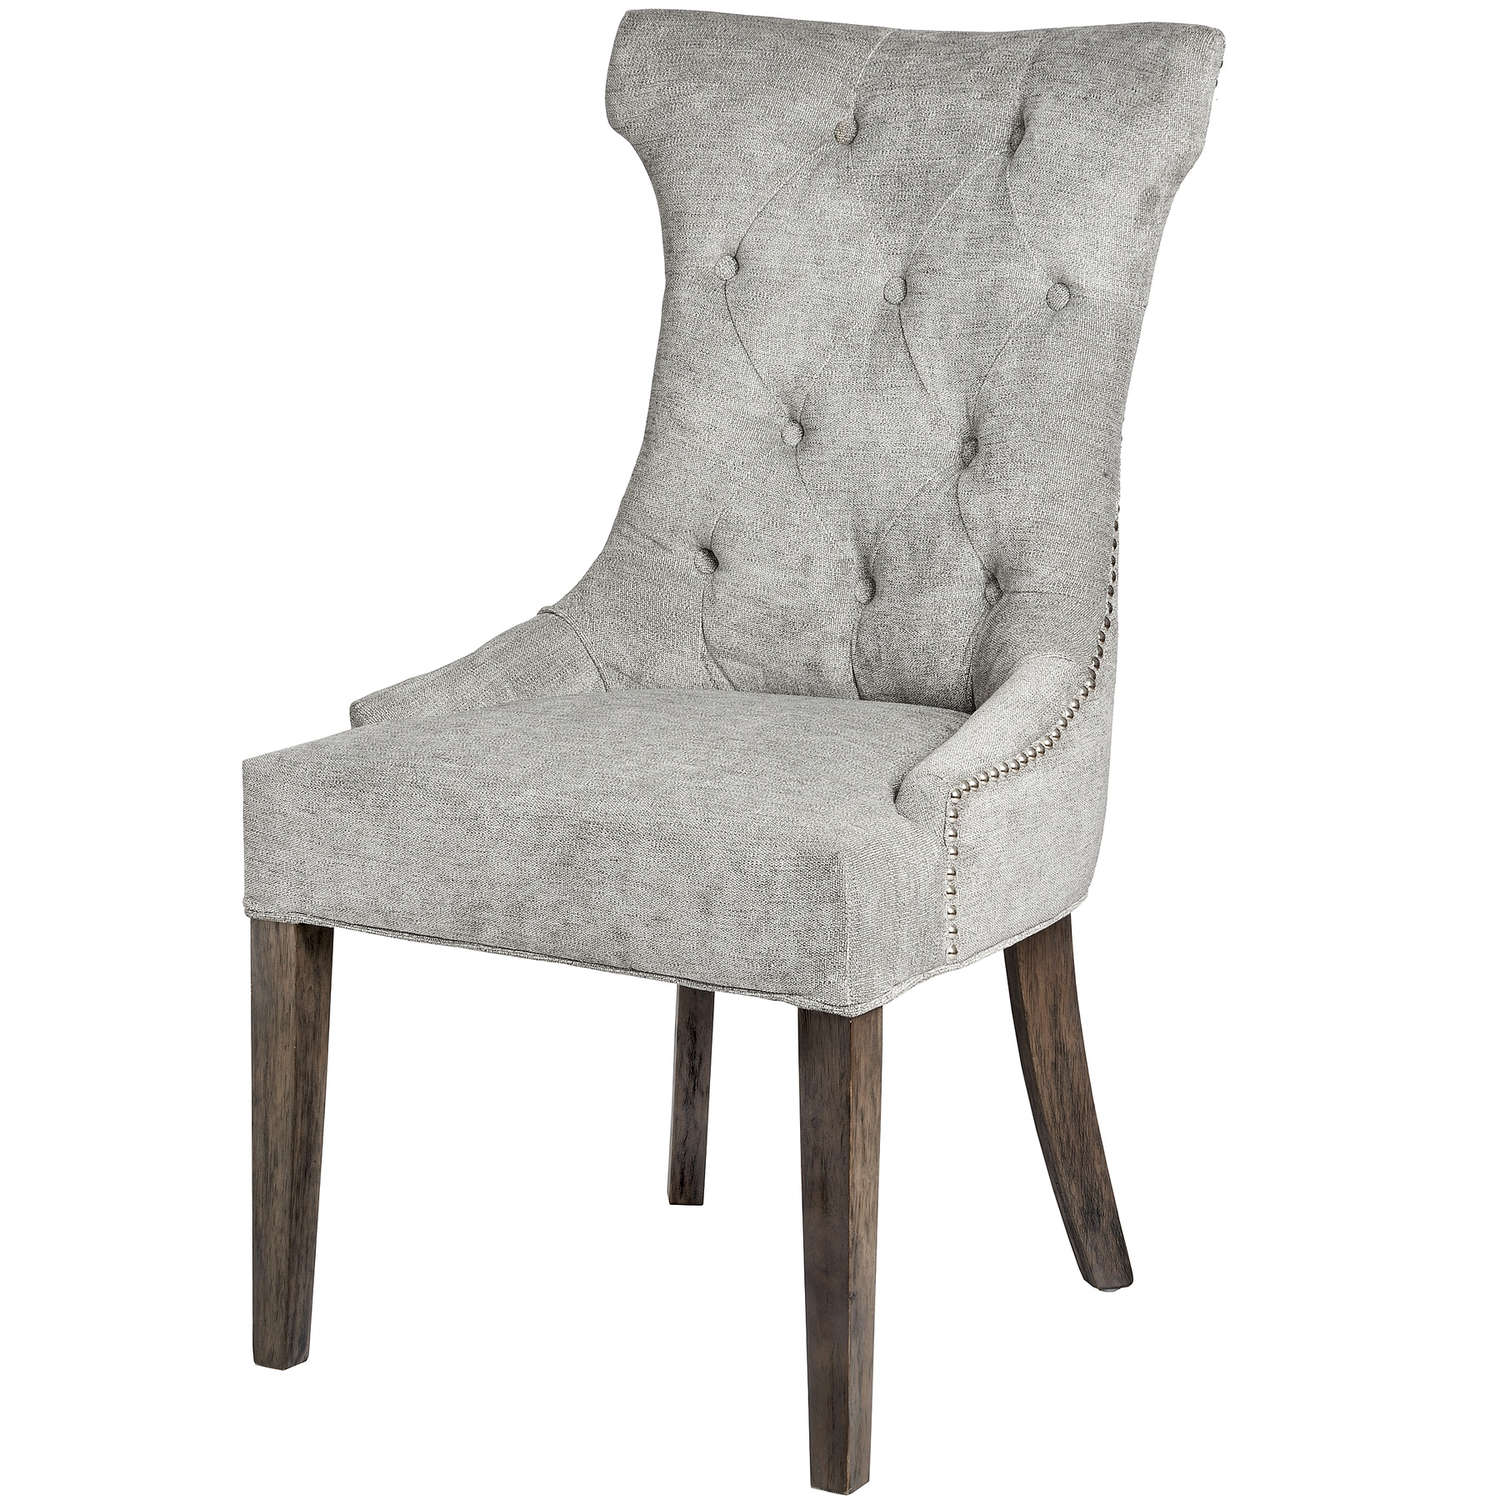 Silver High Wing Ring Backed Dining Chair - Image 1